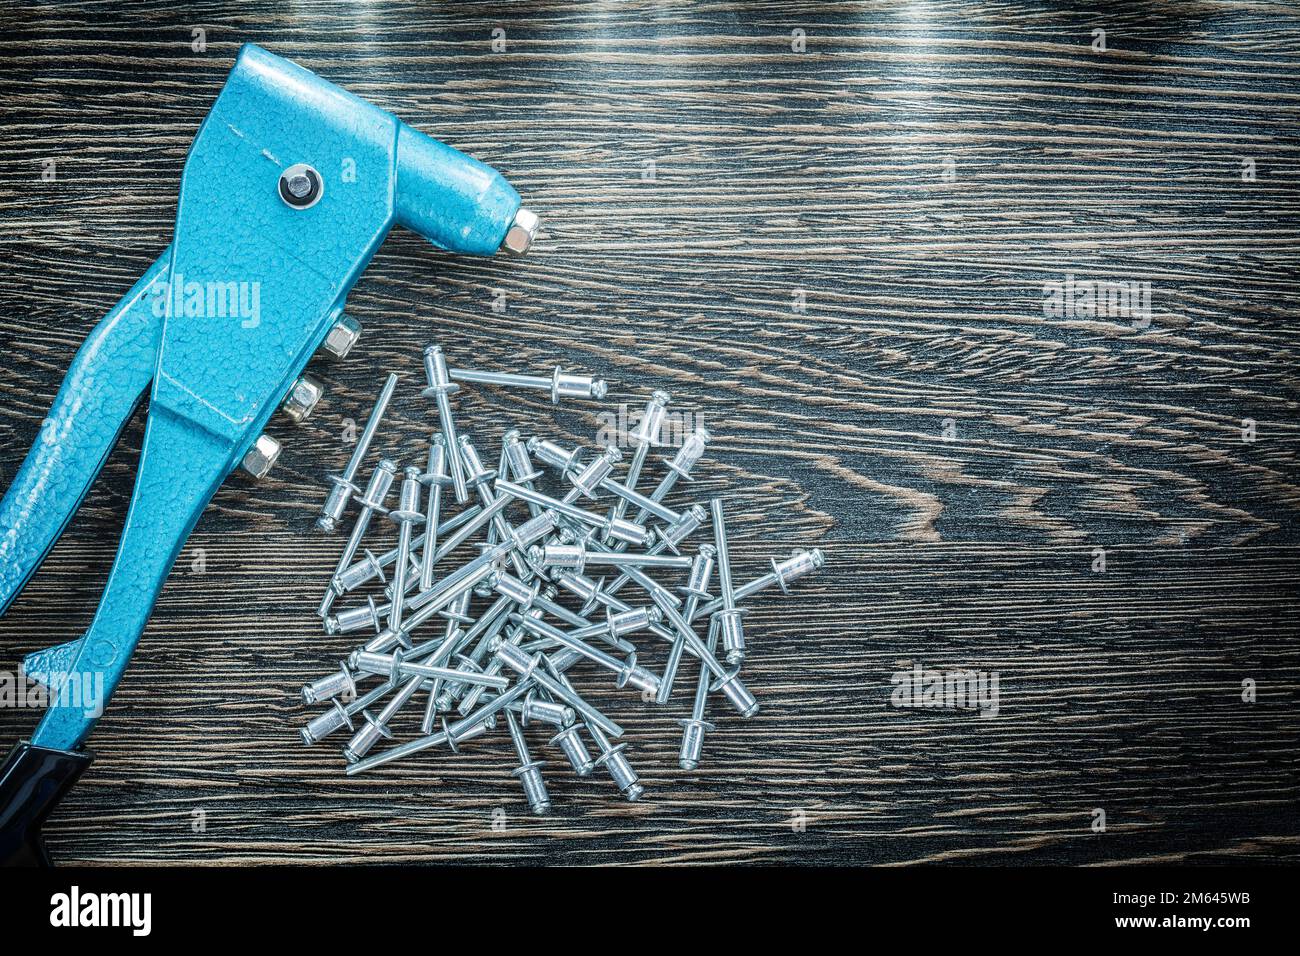 Riveting pliers pile of screws on wooden board. Stock Photo